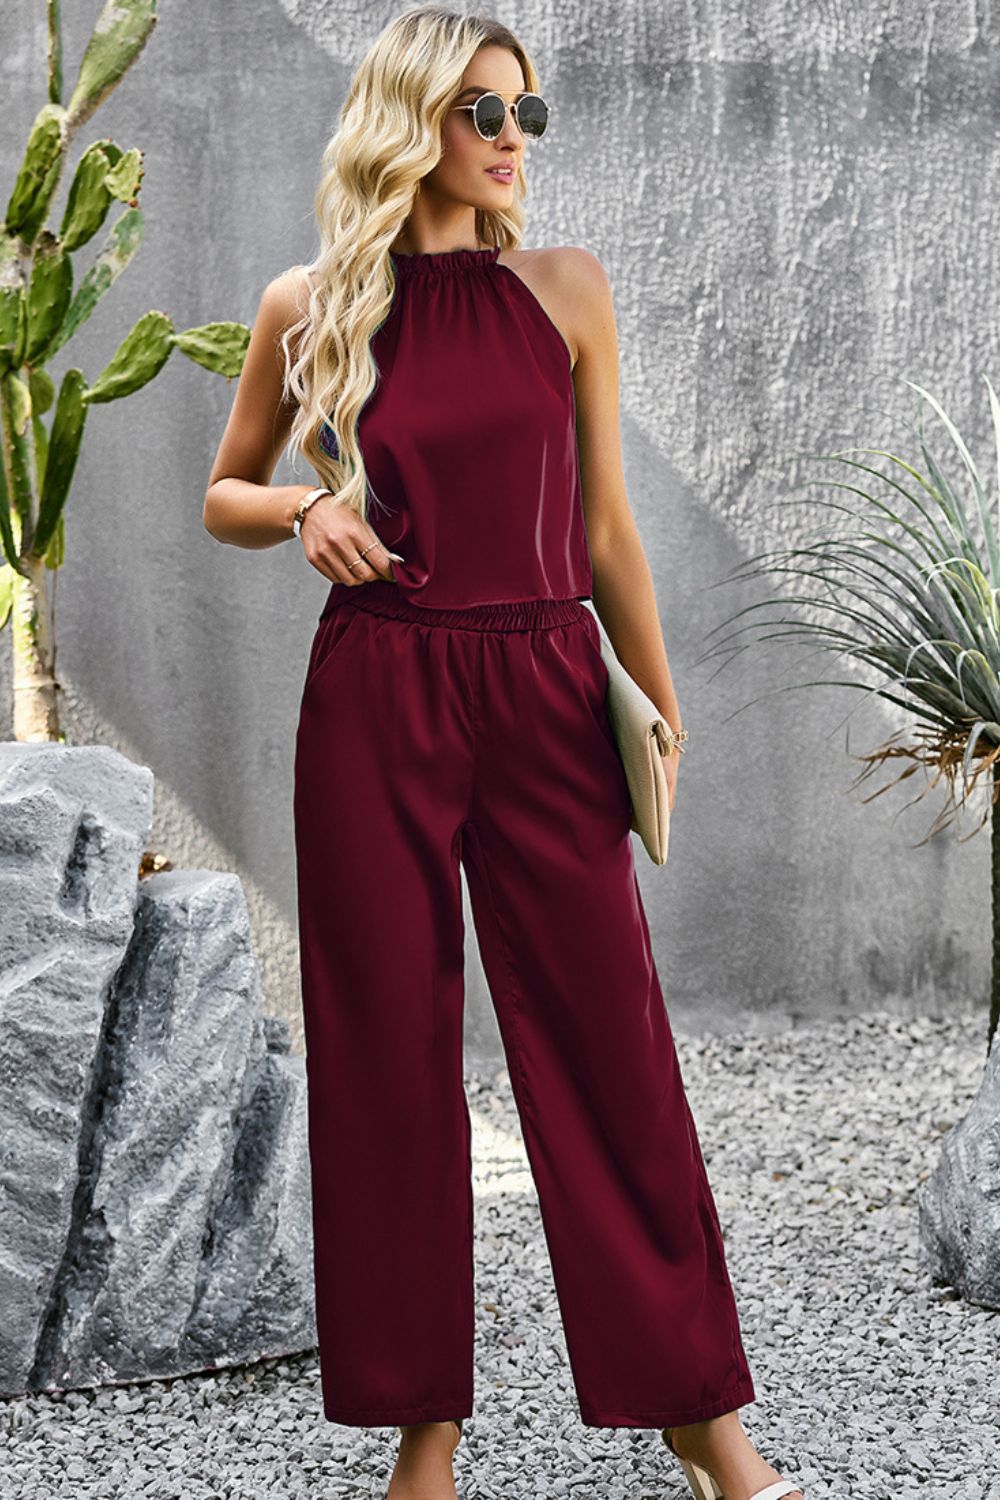 Grecian Neck Sleeveless Pocketed Top and Pants Set - Cheeky Chic Boutique